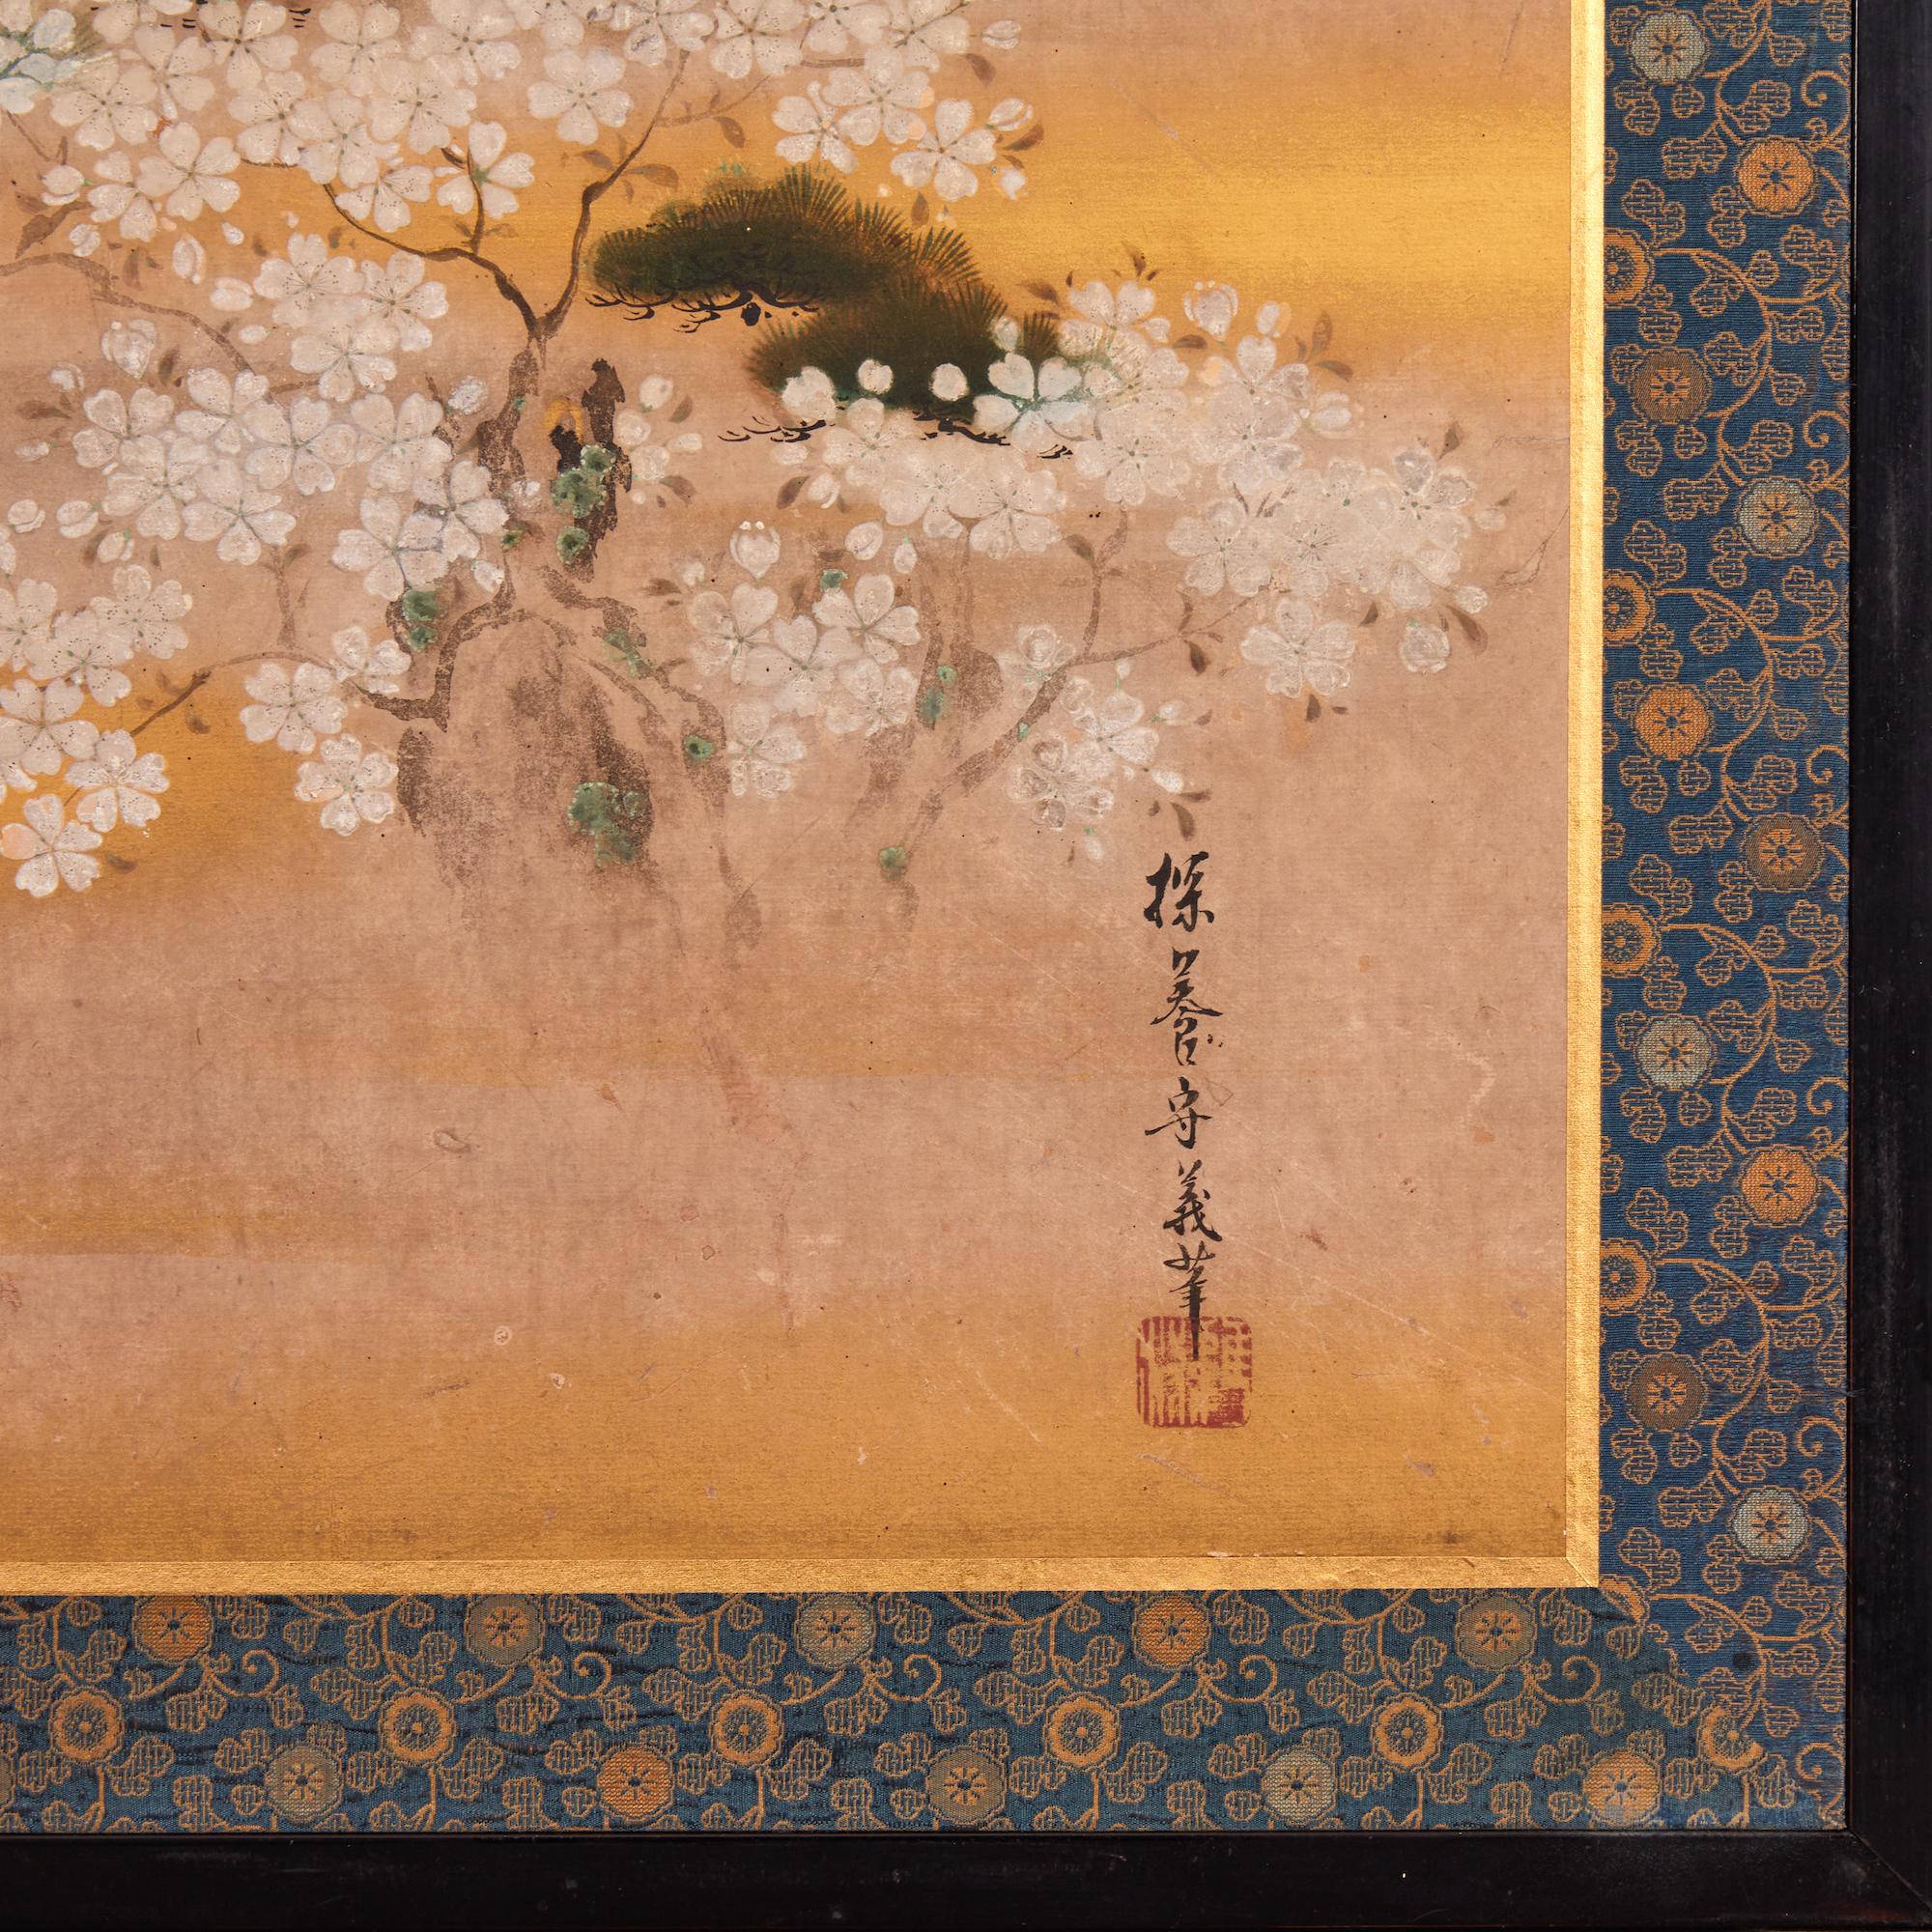 Cherry blossoms and maples among ragged pines. Mineral pigments on mulberry paper with gold mist clouds. Completely remounted utilizing an antique silk brocade border and black lacquer wood trim with beautiful old bronze hardware. Signature and seal